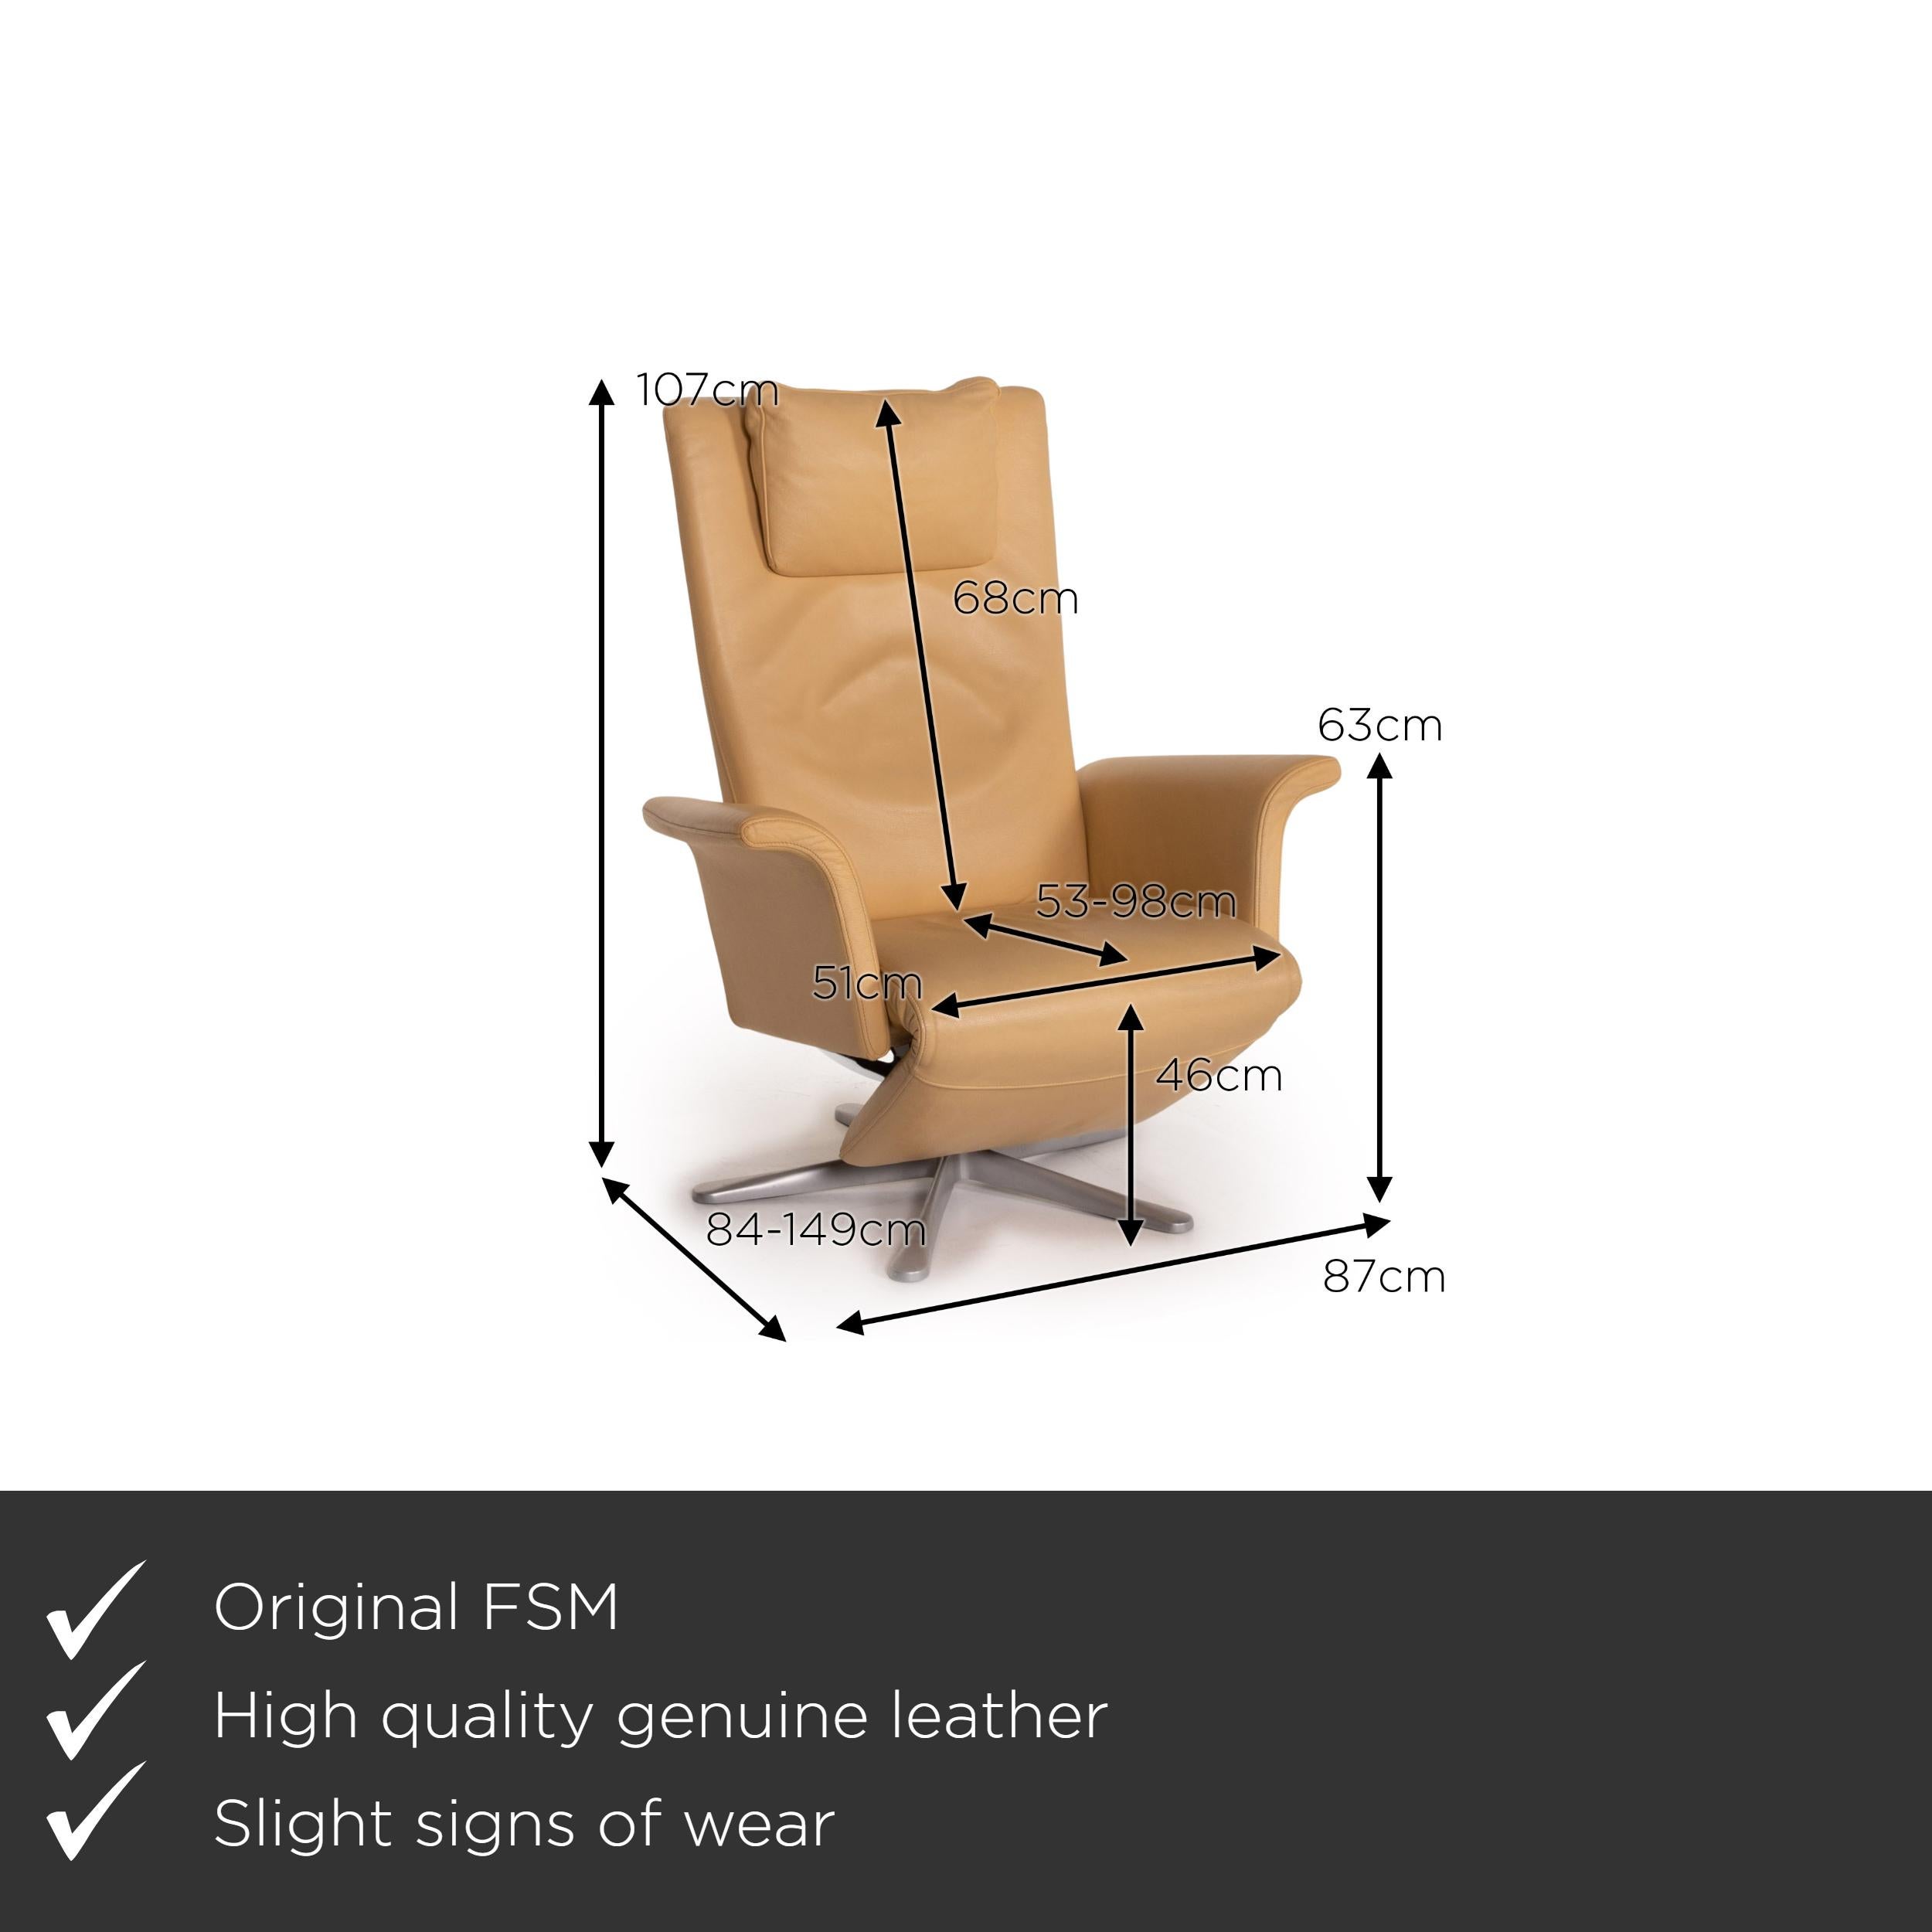 We present to you a FSM Filou leather armchair beige relaxation function relaxation.


 Product measurements in centimeters:
 

Depth 84
Width 87
Height 107
Seat height 46
Rest height 63
Seat depth 53
Seat width 51
Back height 68.
 